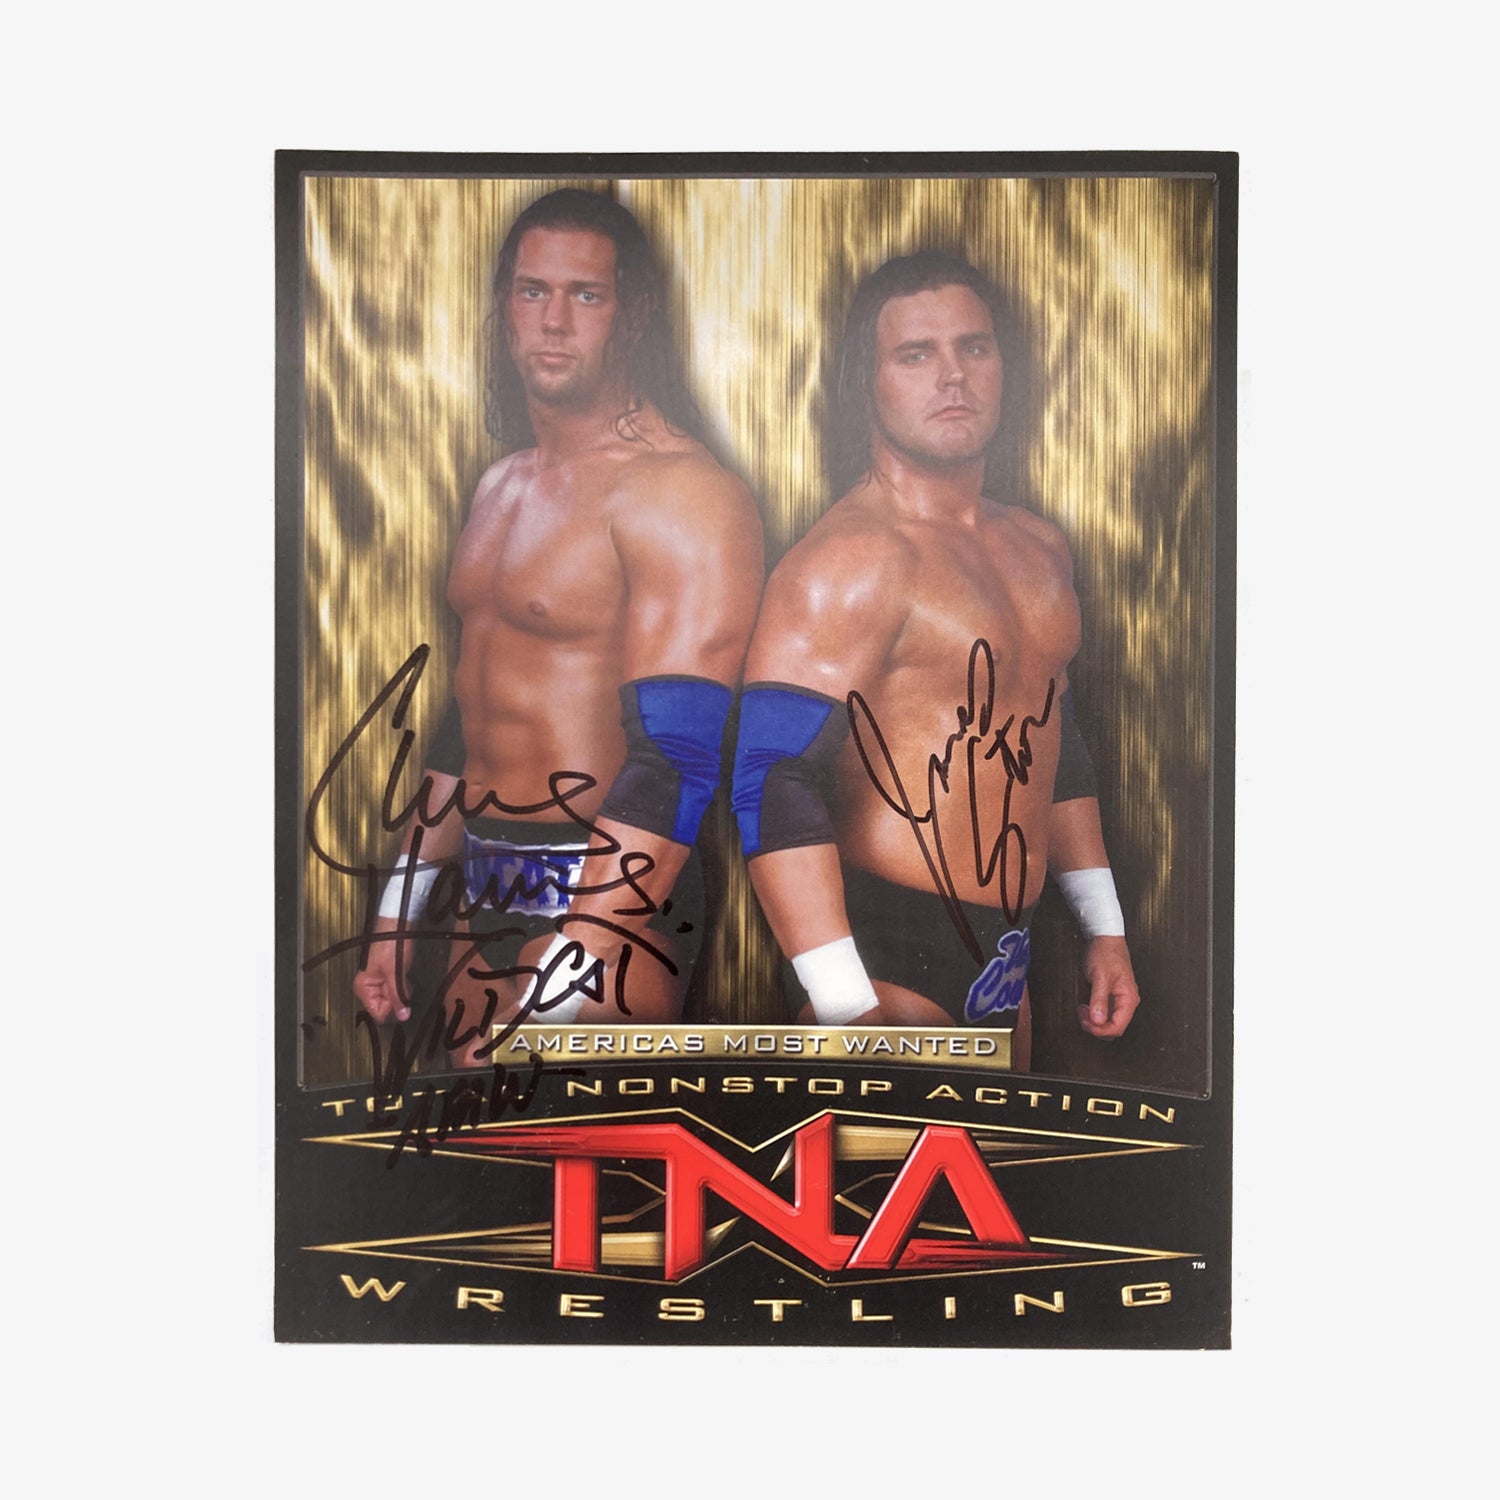 TNA Wrestling America's Most Wanted Autographed 8x10 from Fightabilia.com